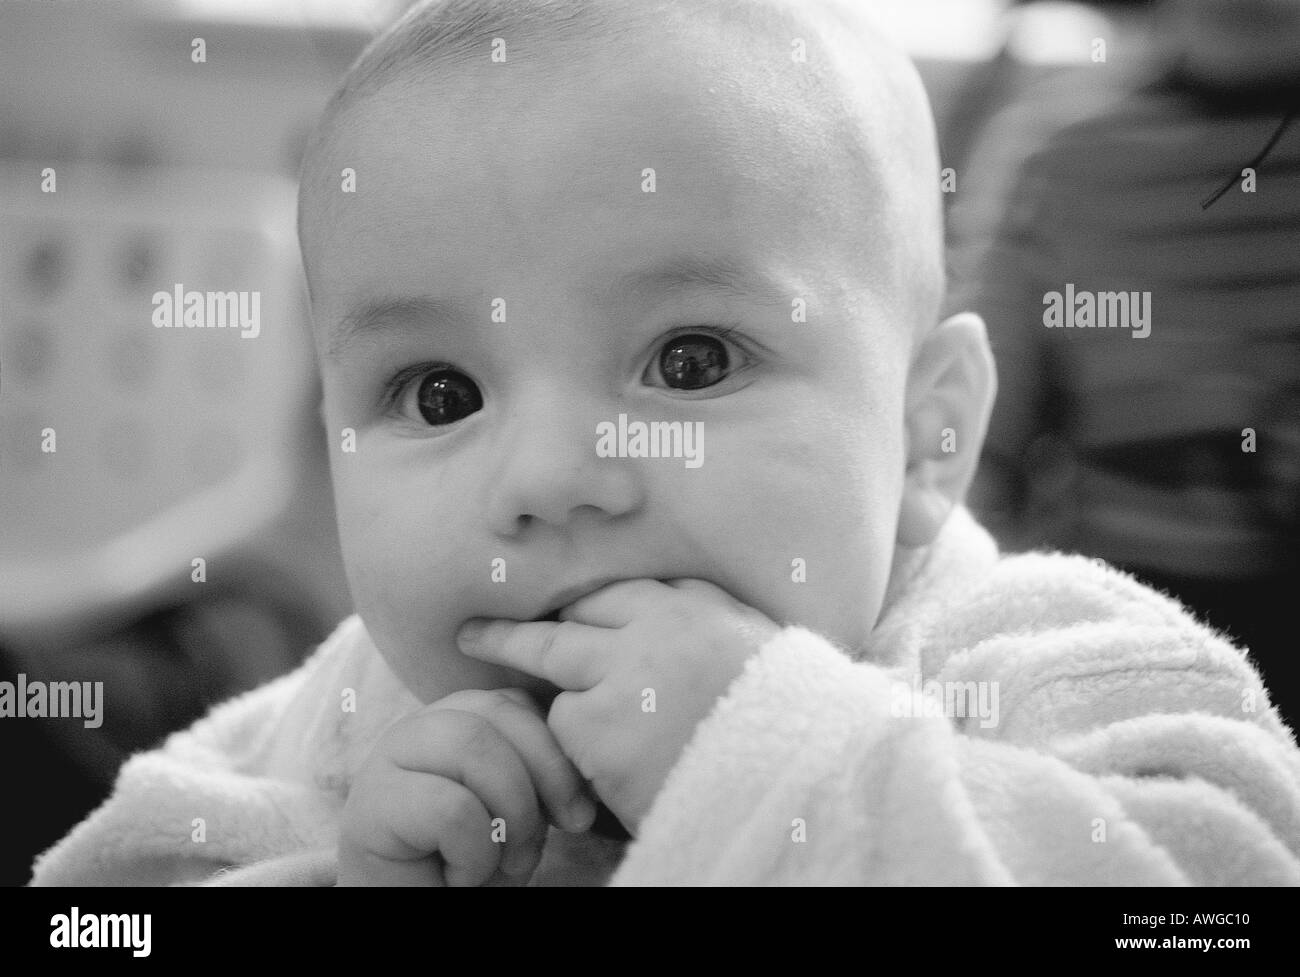 A baby with hand in mouth Stock Photo